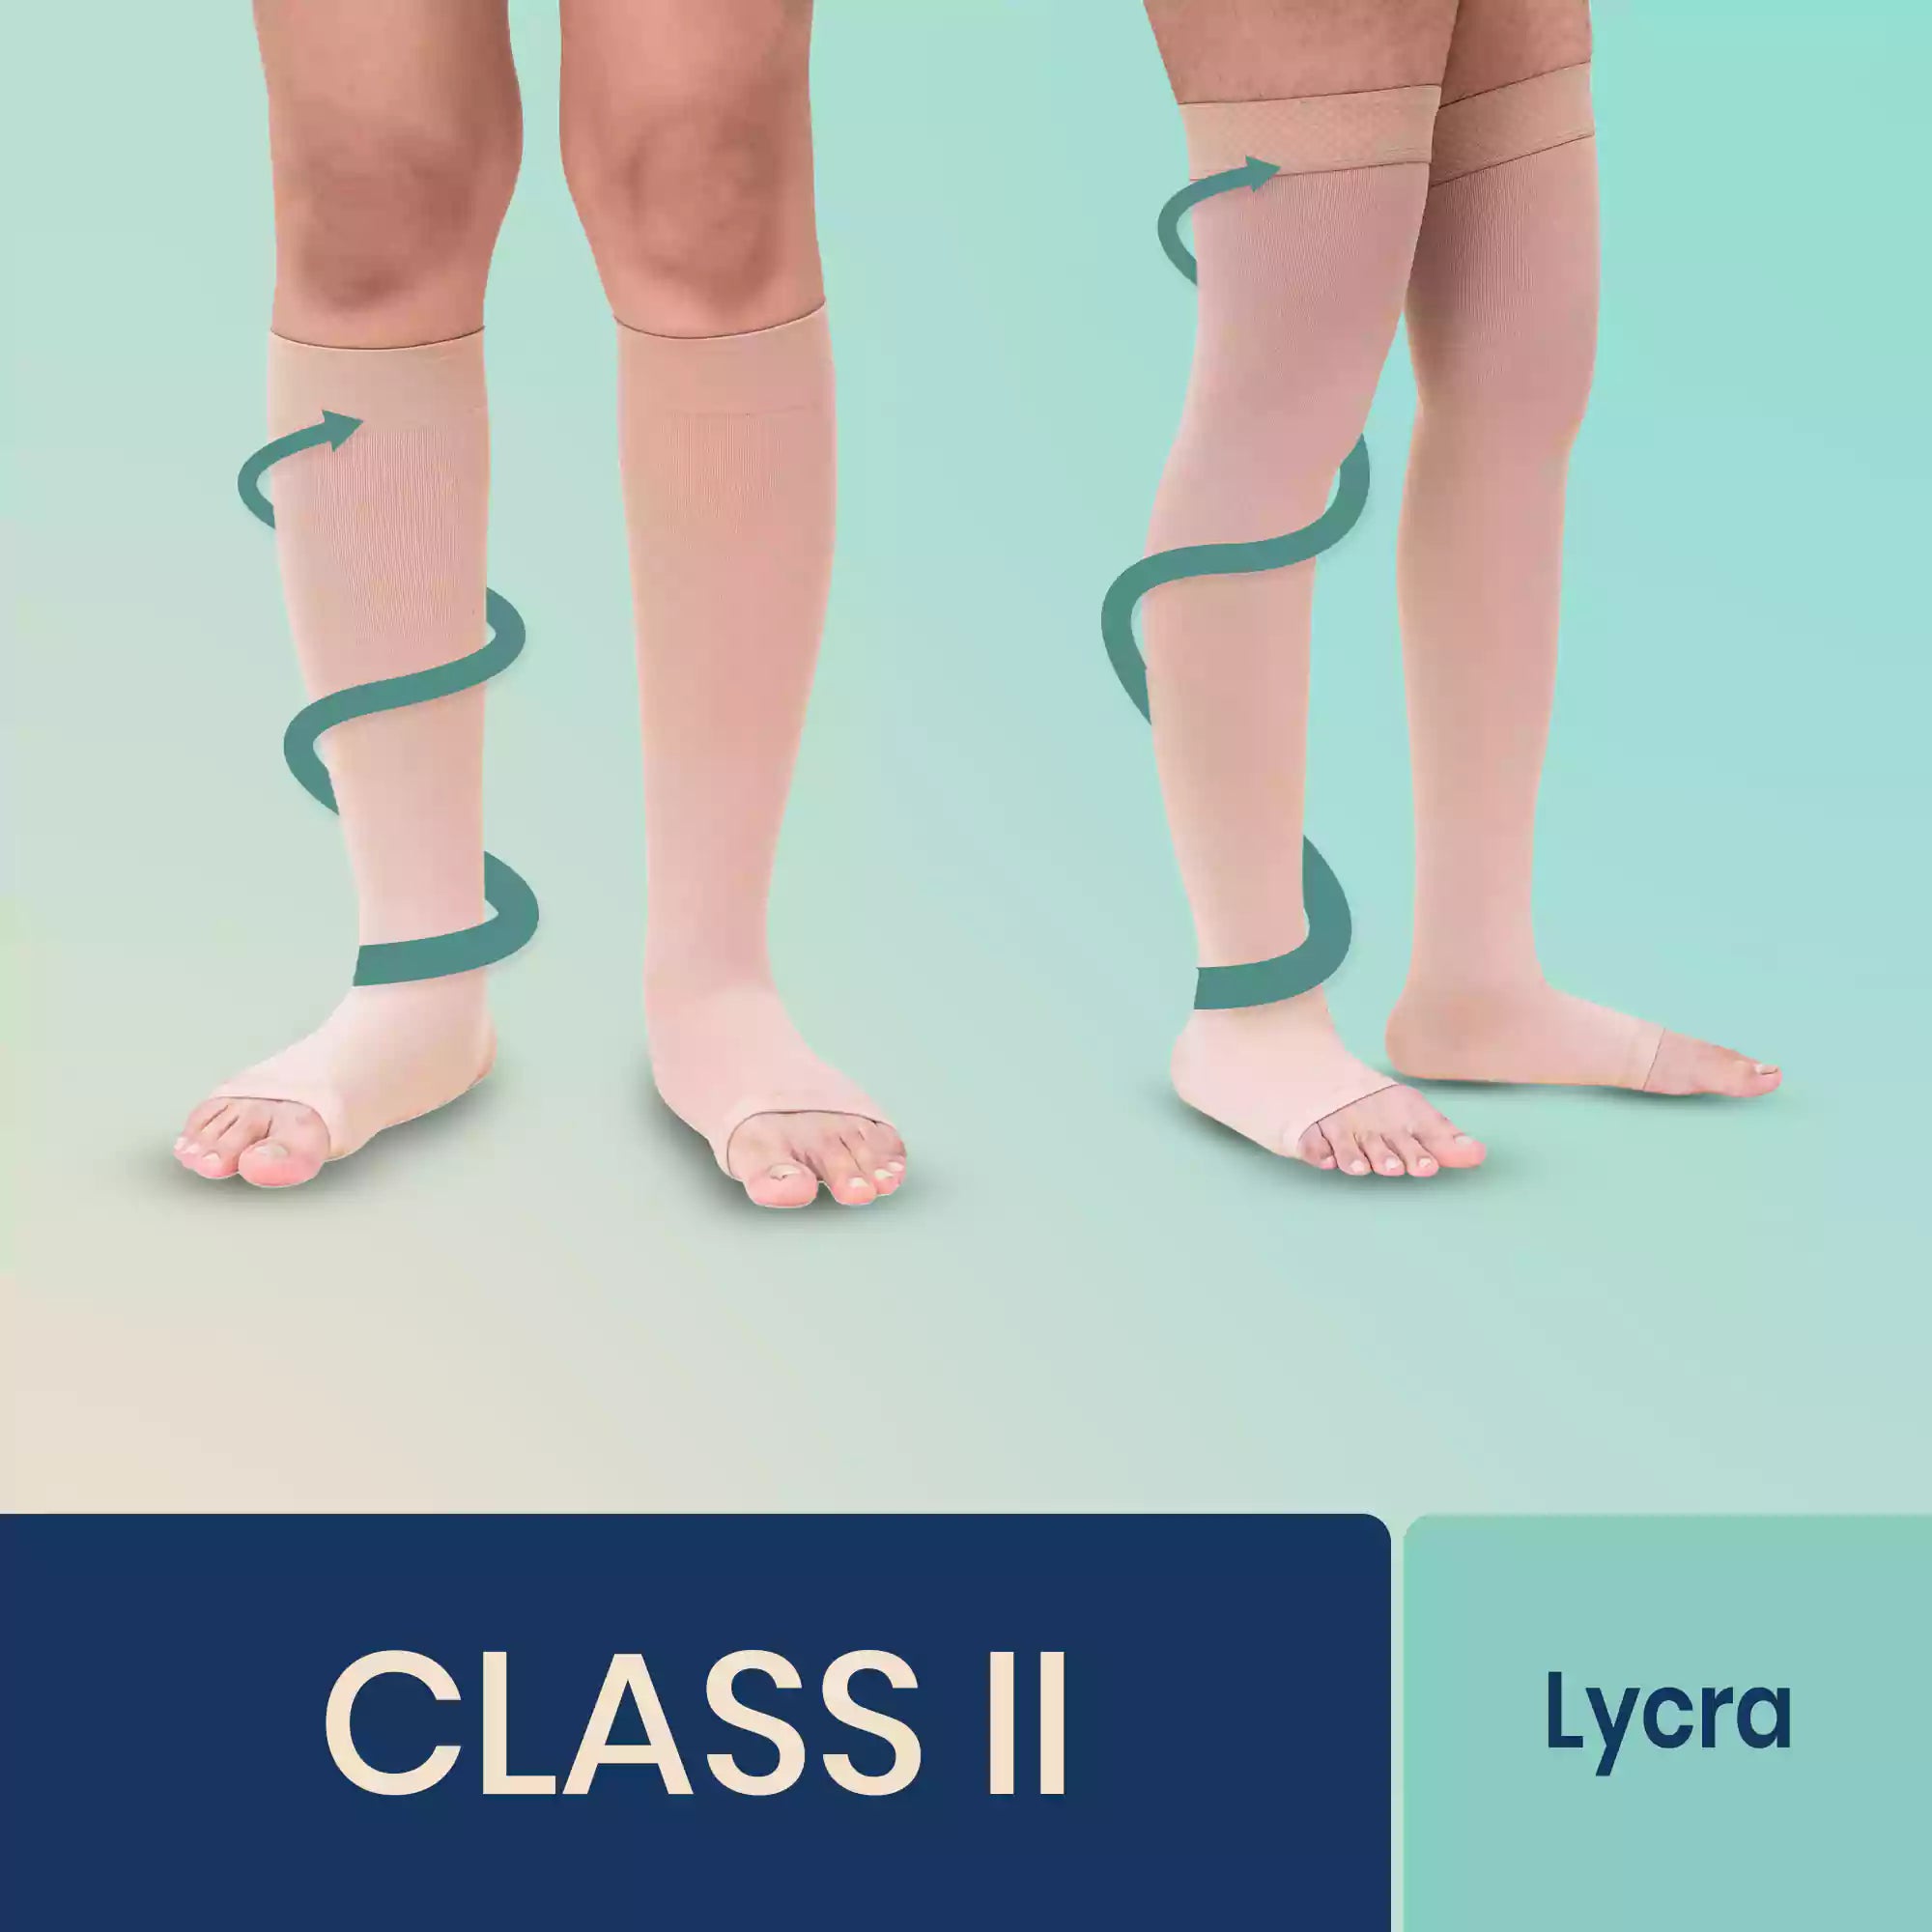 Compression Stockings for Varicose Veins: What You Need to Know